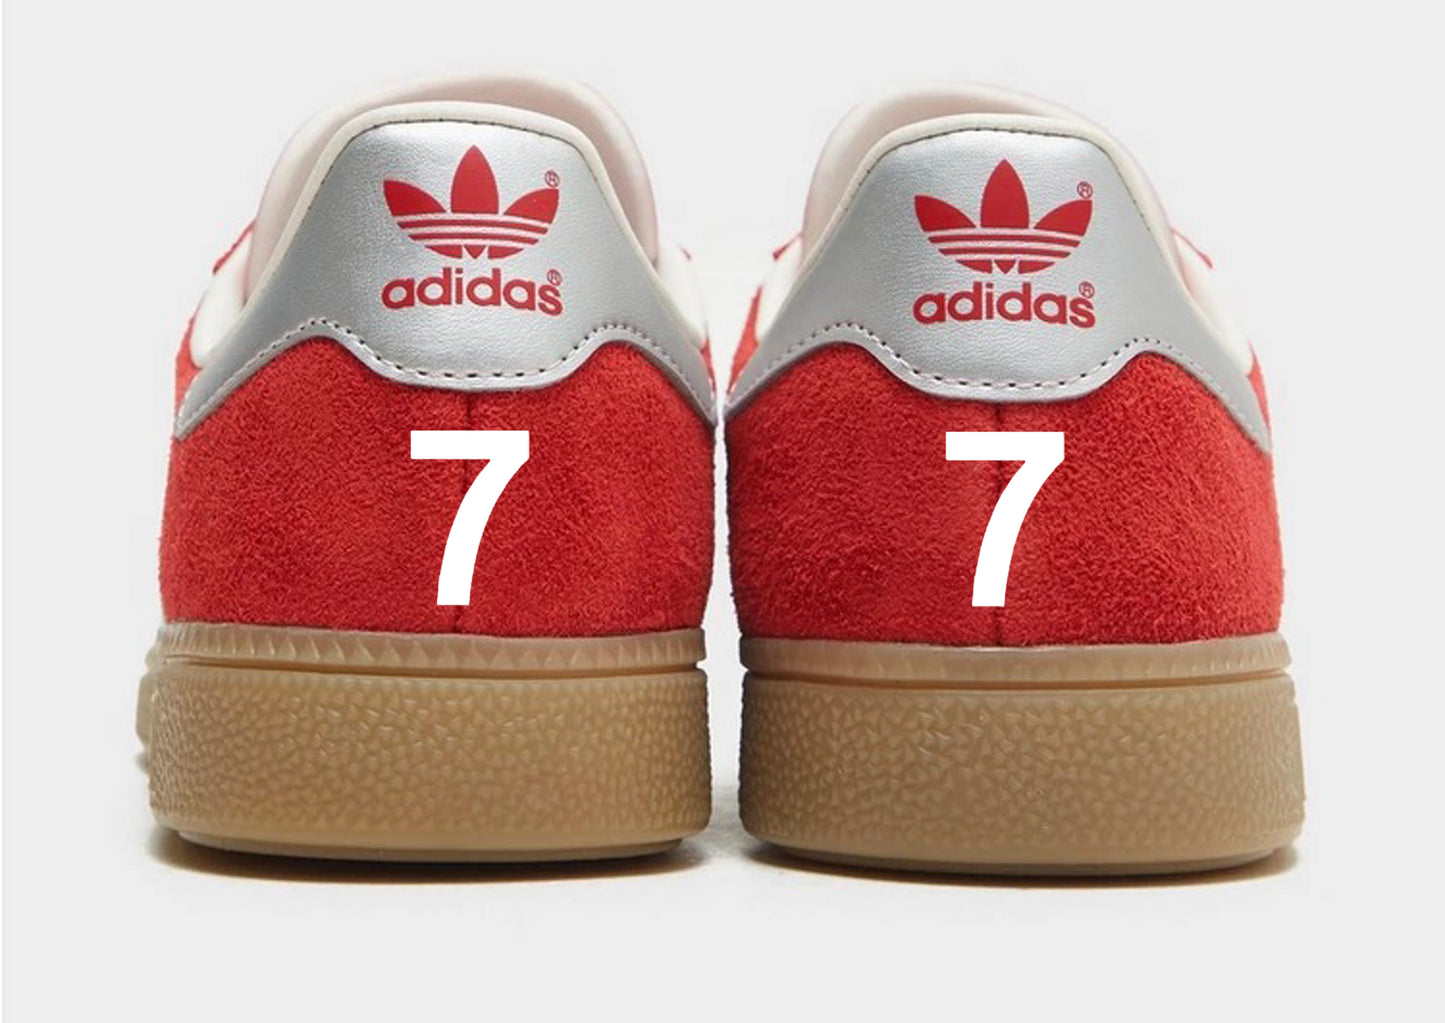 Limited edition George Best Manchester United Adidas Munchen red custom trainers / sneakers